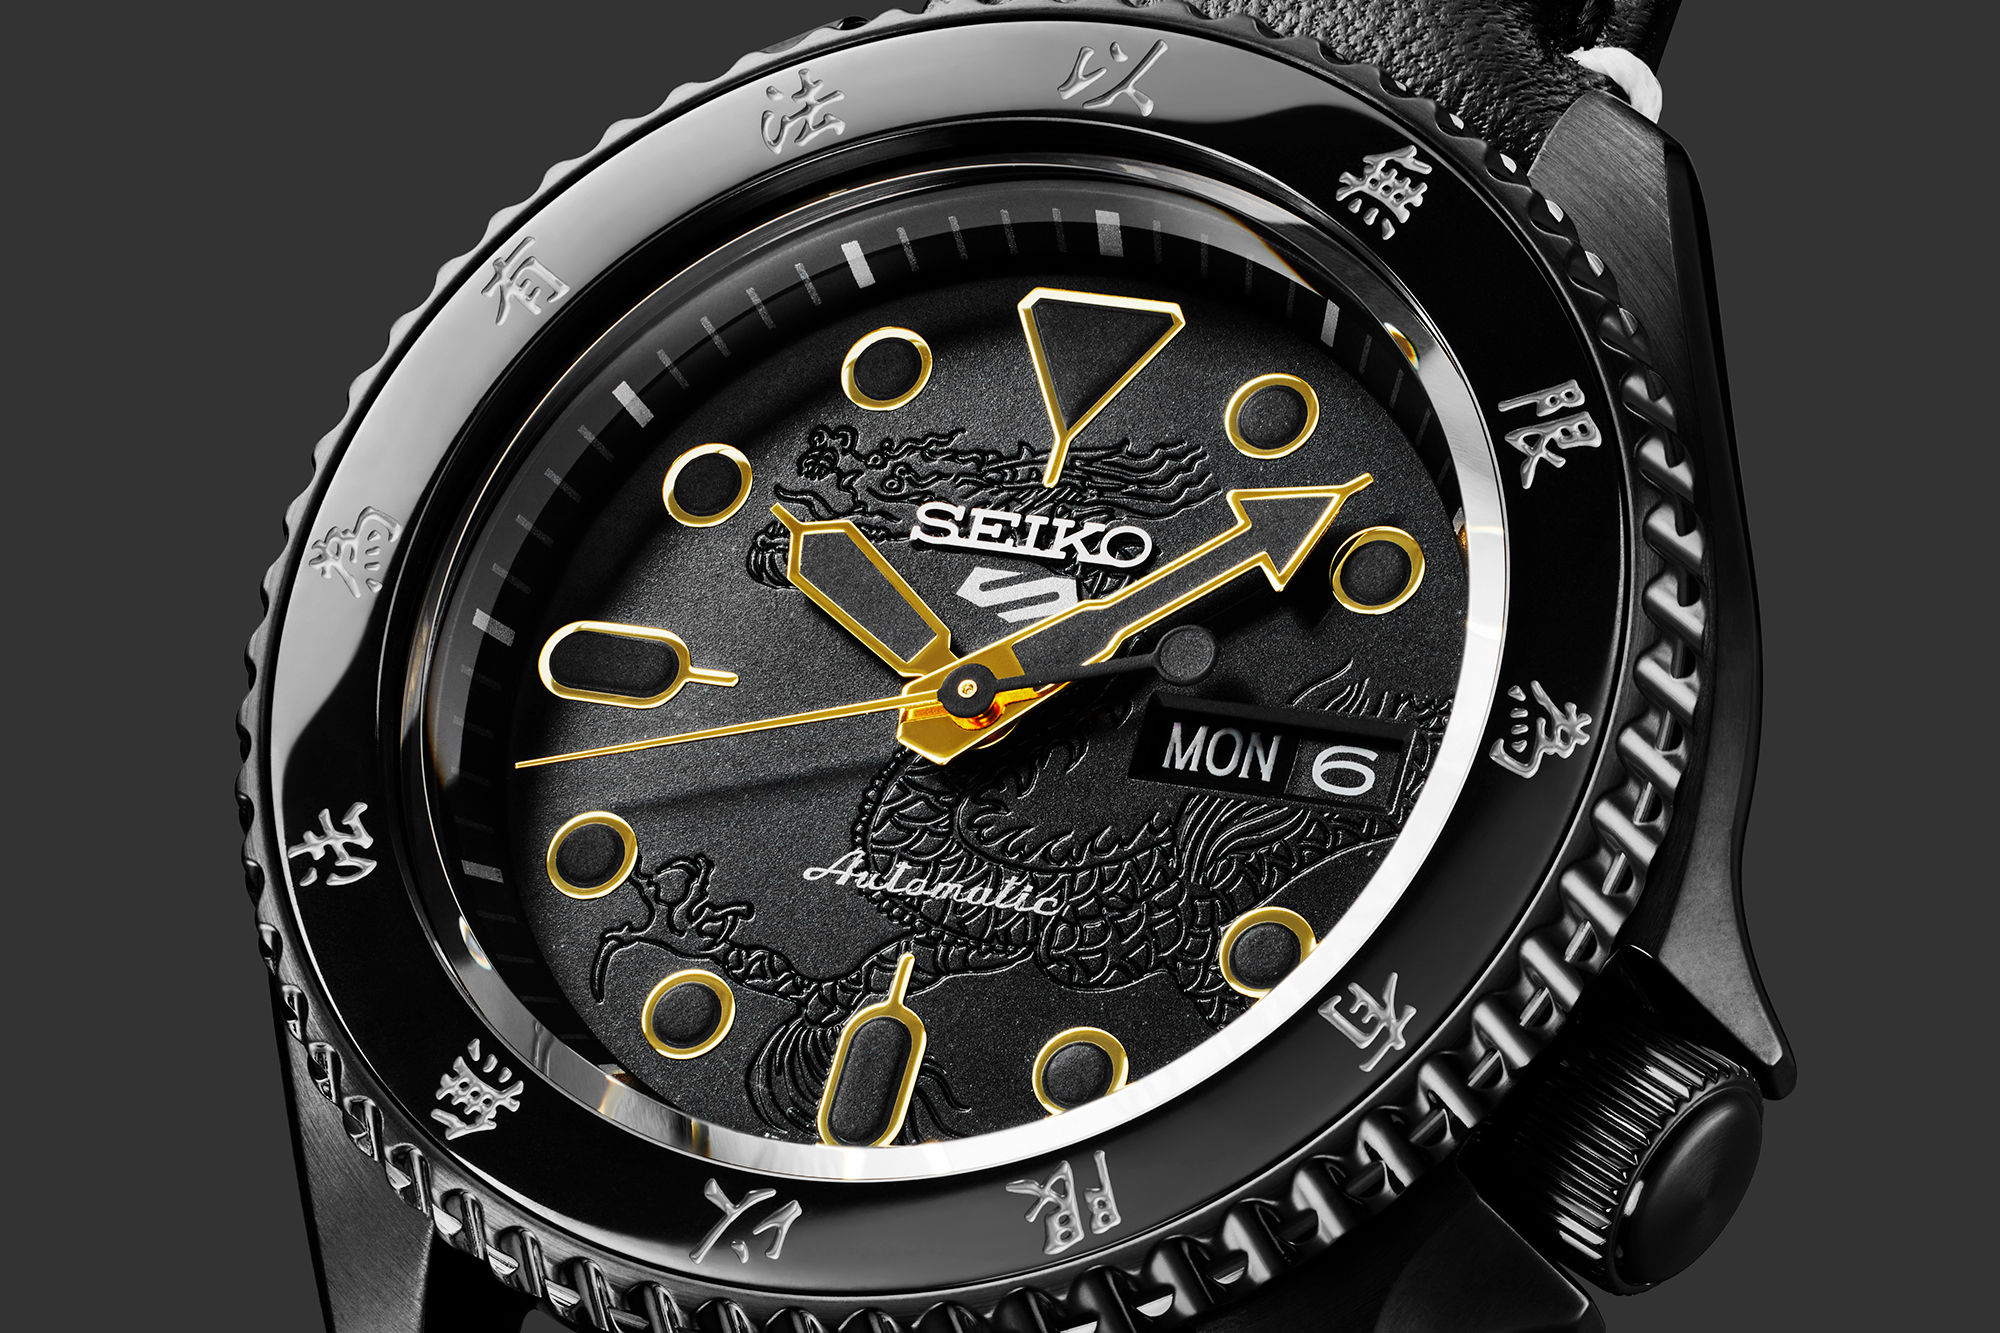 All-new Seiko Bruce Lee x 5 Sports and Prospex ‘Silfra’